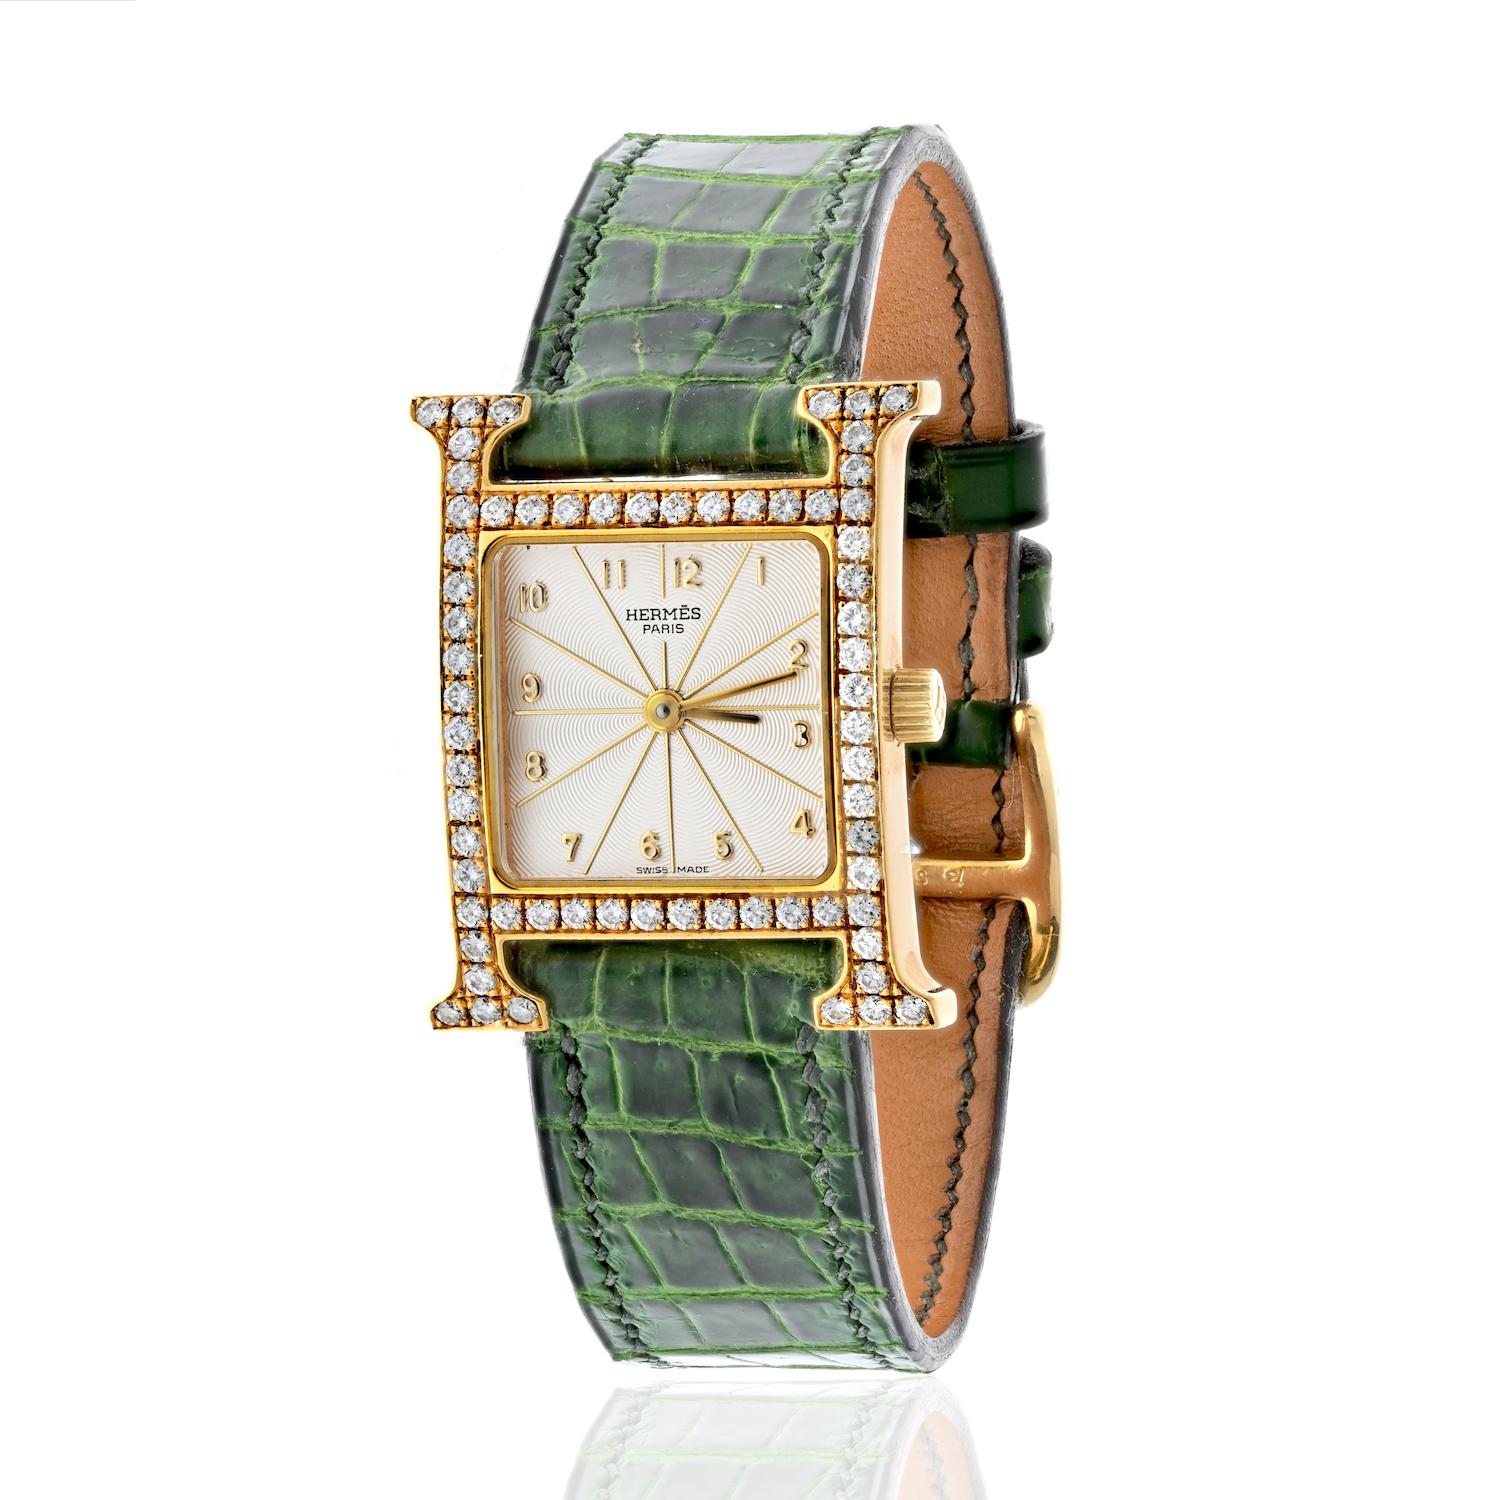 Hermes 18K Yellow Gold Heure H 21mm HH 1.286 Ladies Diamond Watch.

18k yellow gold set with round diamonds (0.90ct approx.), 21x30 mm
Dial: white 
Movement: quartz, made in Switzerland
Functions: hours, minutes
Cream number dial.
Tang